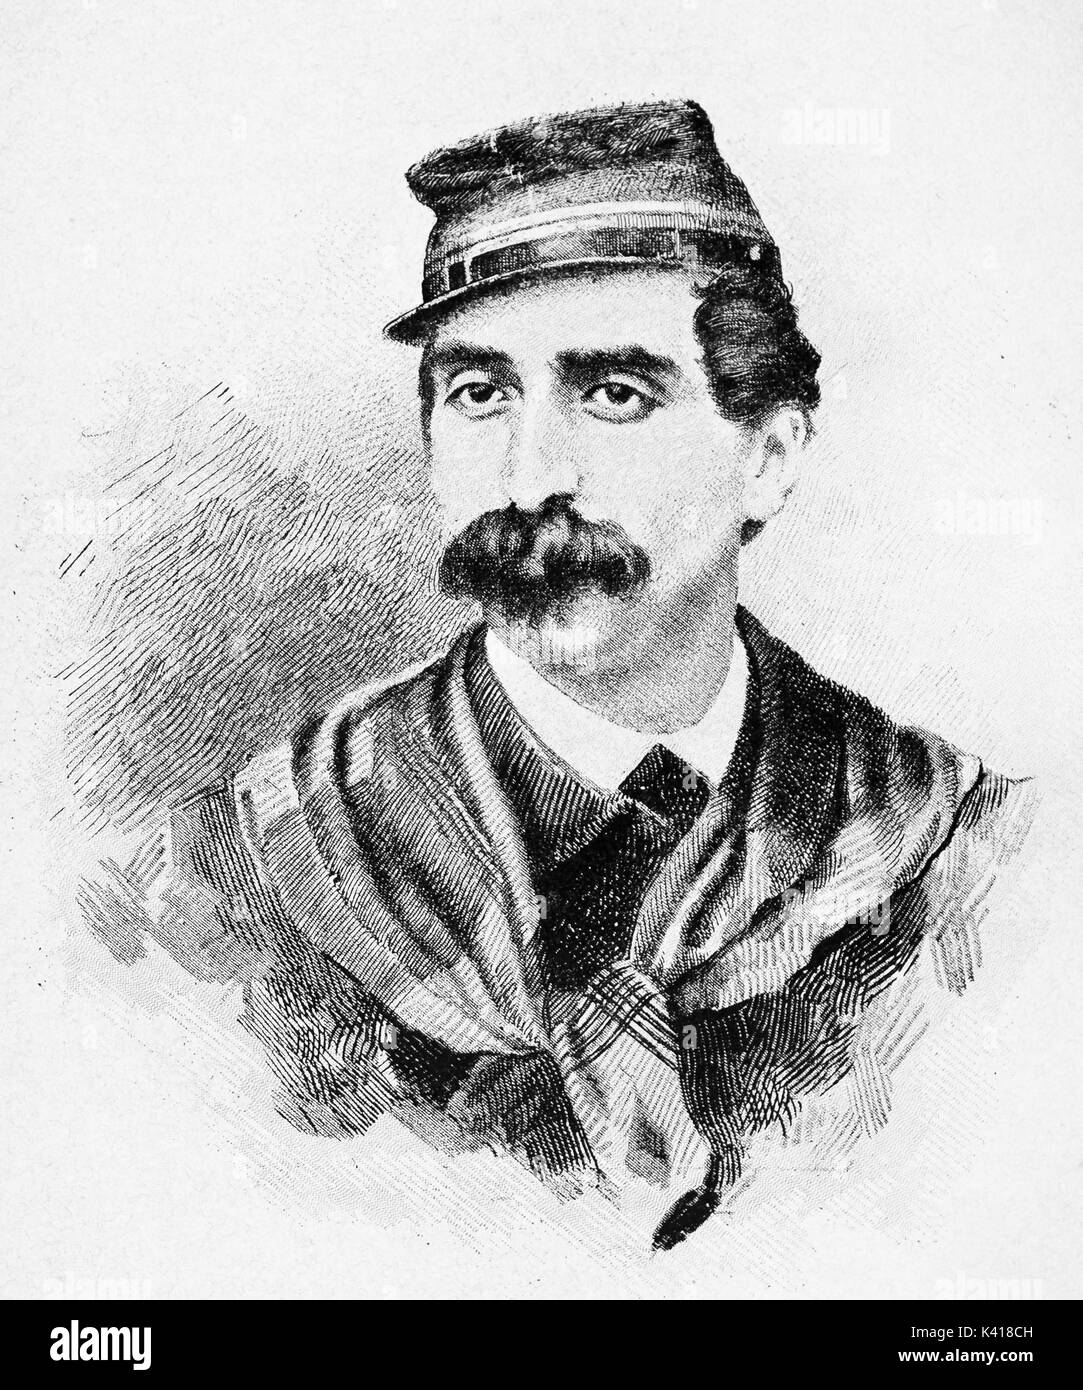 Old engraved closeup portrait of an ancient man with strong moustaches and a soldier hat. Giuseppe Guerzoni (1835 - 1886). By E. Matania published on Garibaldi e i Suoi Tempi Milan Italy 1884 Stock Photo